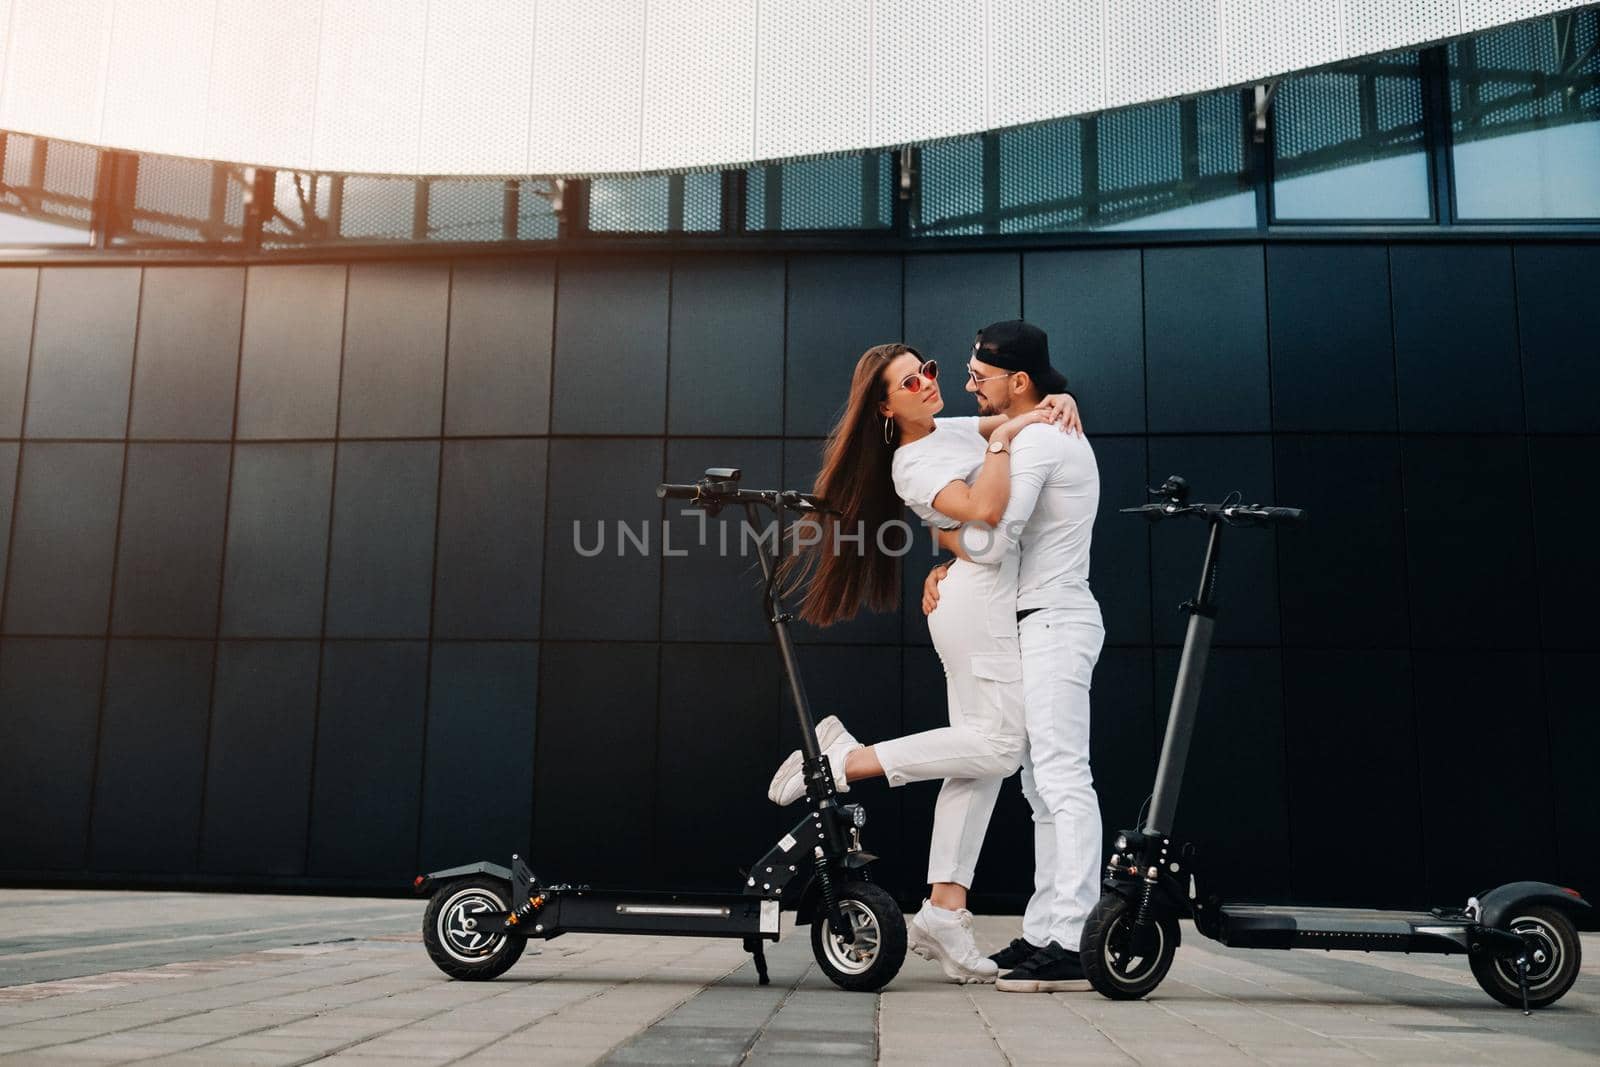 A couple on electric scooters embrace in the city, a couple in love on scooters.